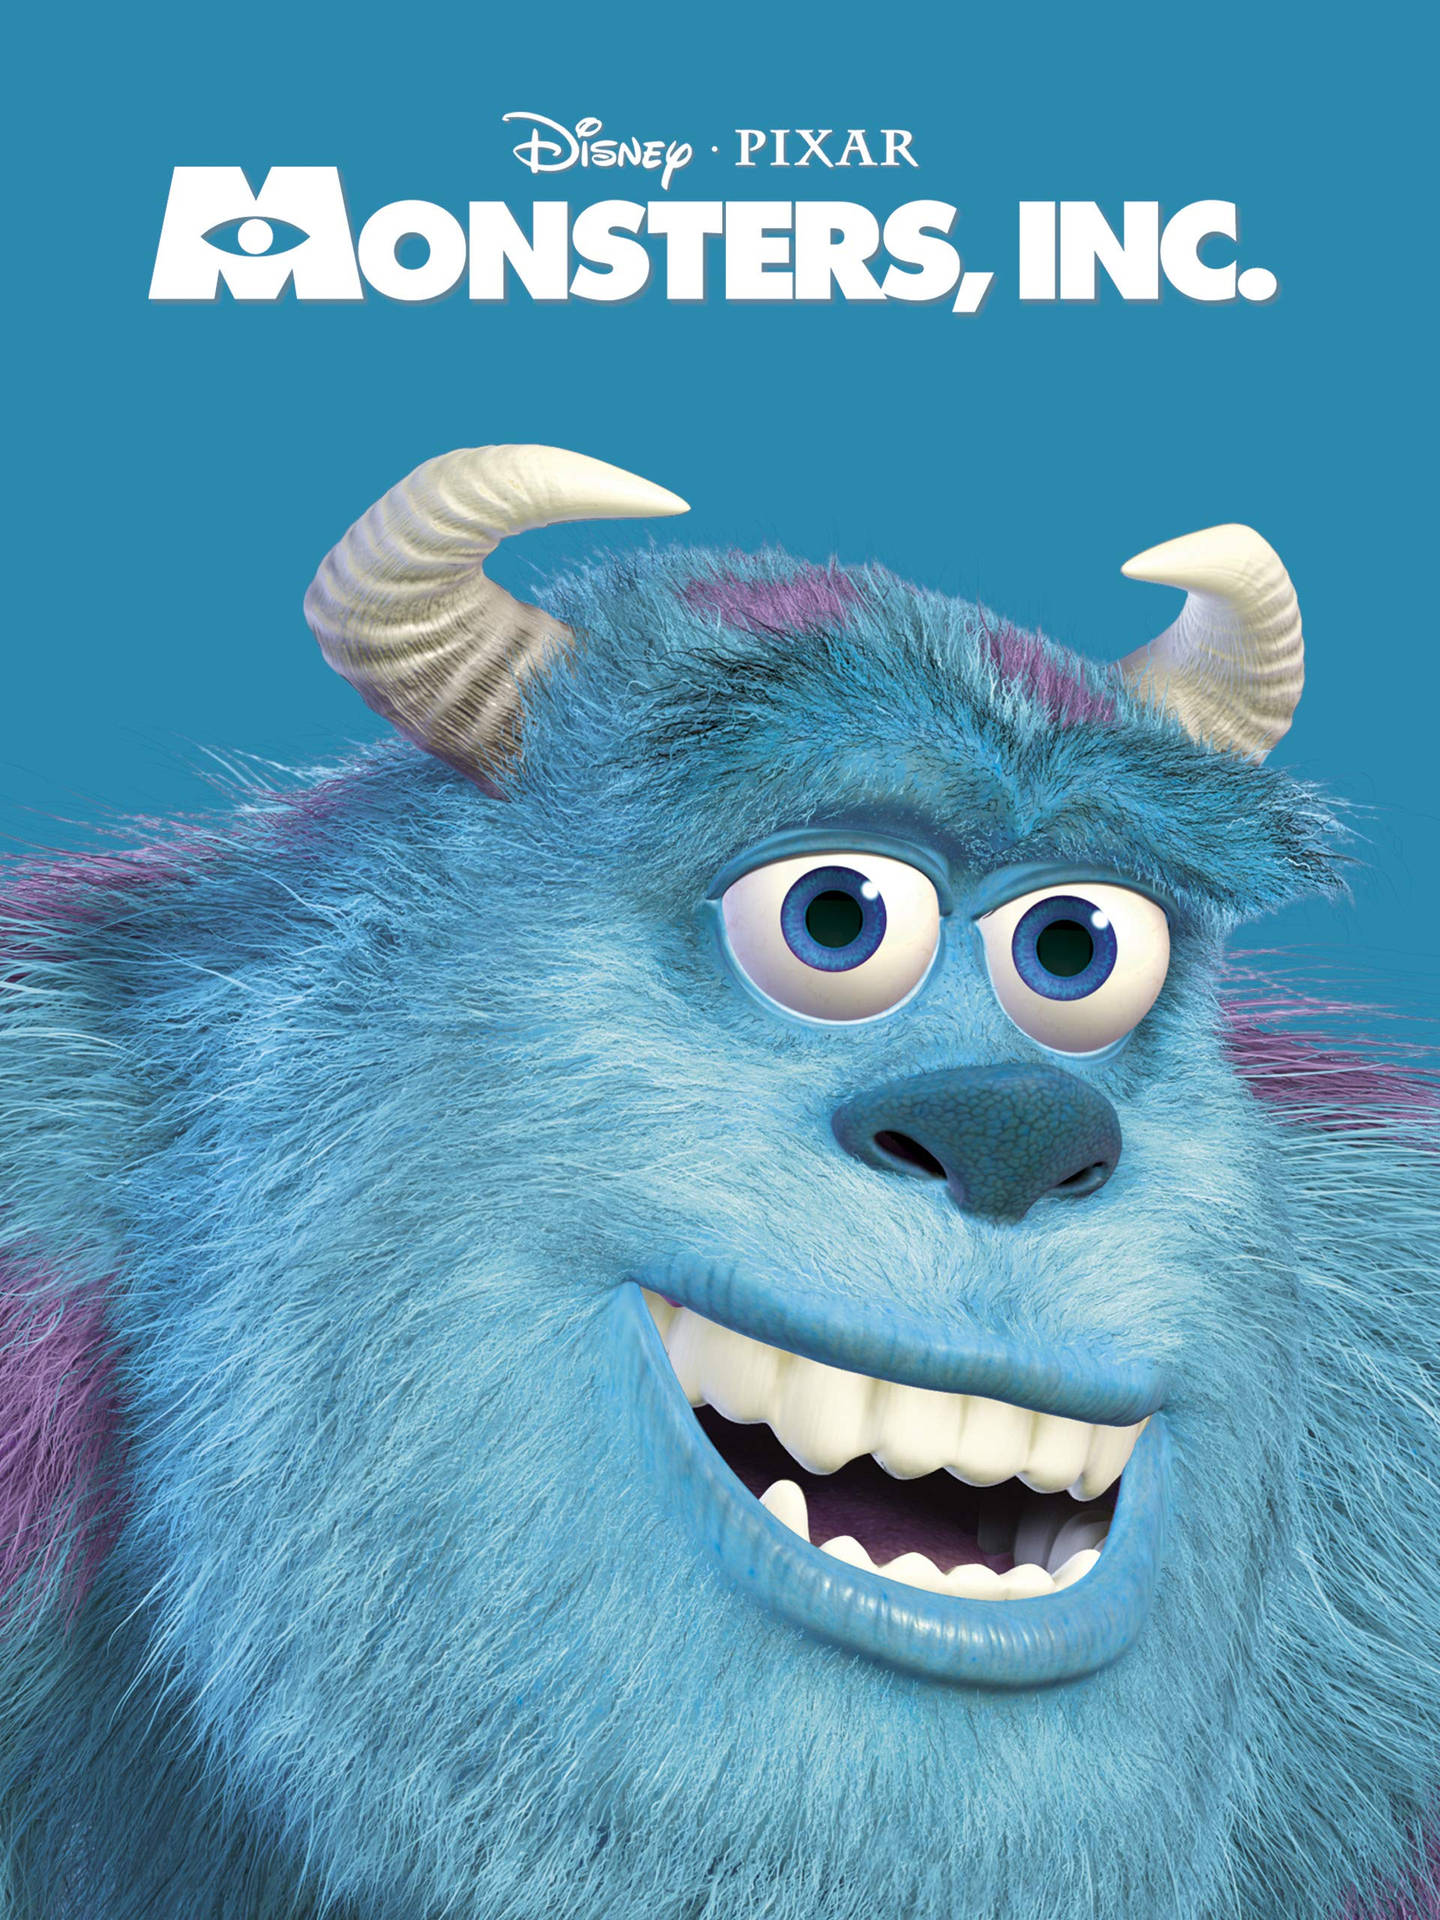 Sulley From Pixar's 